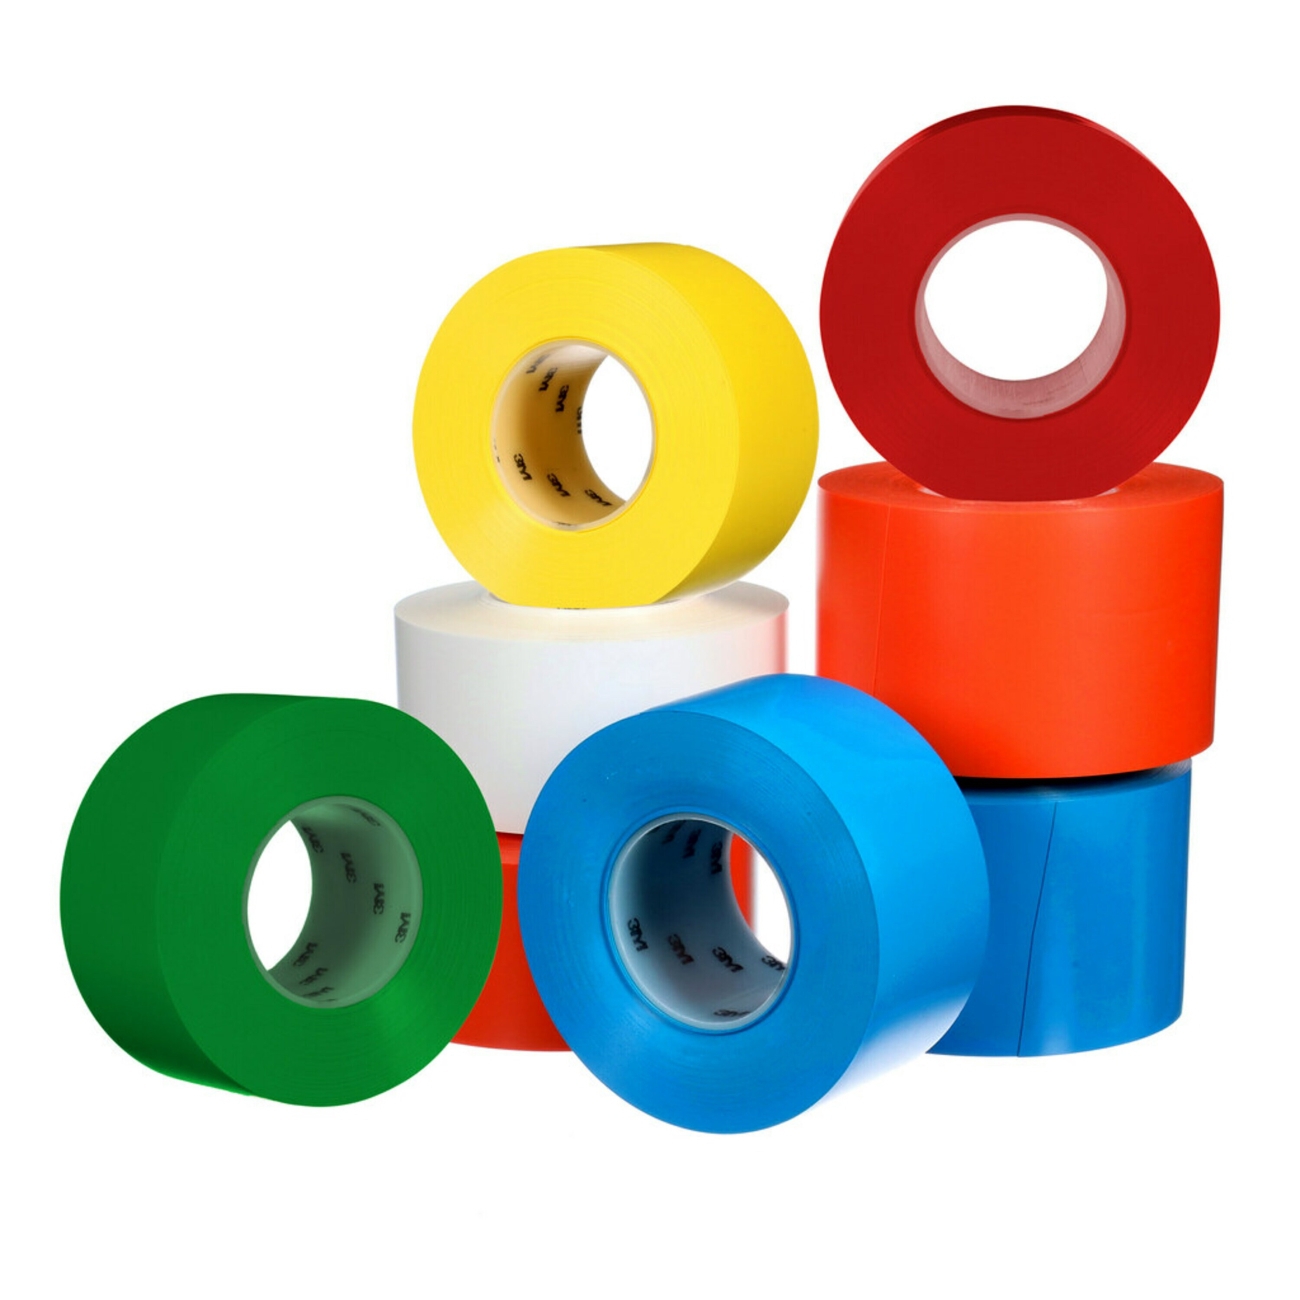 3M extra strong floor marking tape 971L, red, 610mm x 32.9m, 0.43mm